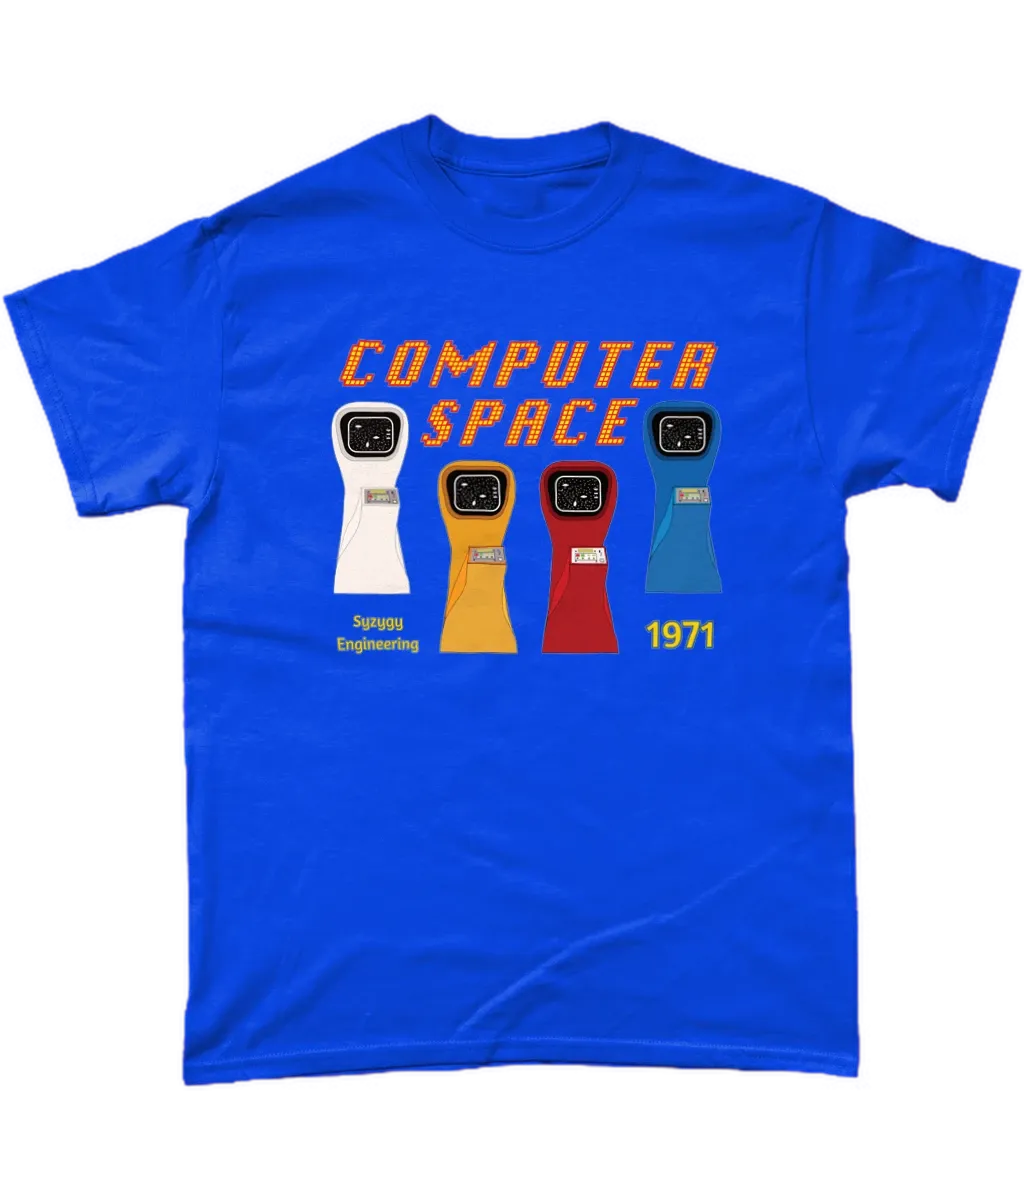 Royal blue T-shirt with computer space written and 4 Arcade machines in their iconic colours,white,yellow,red and blue